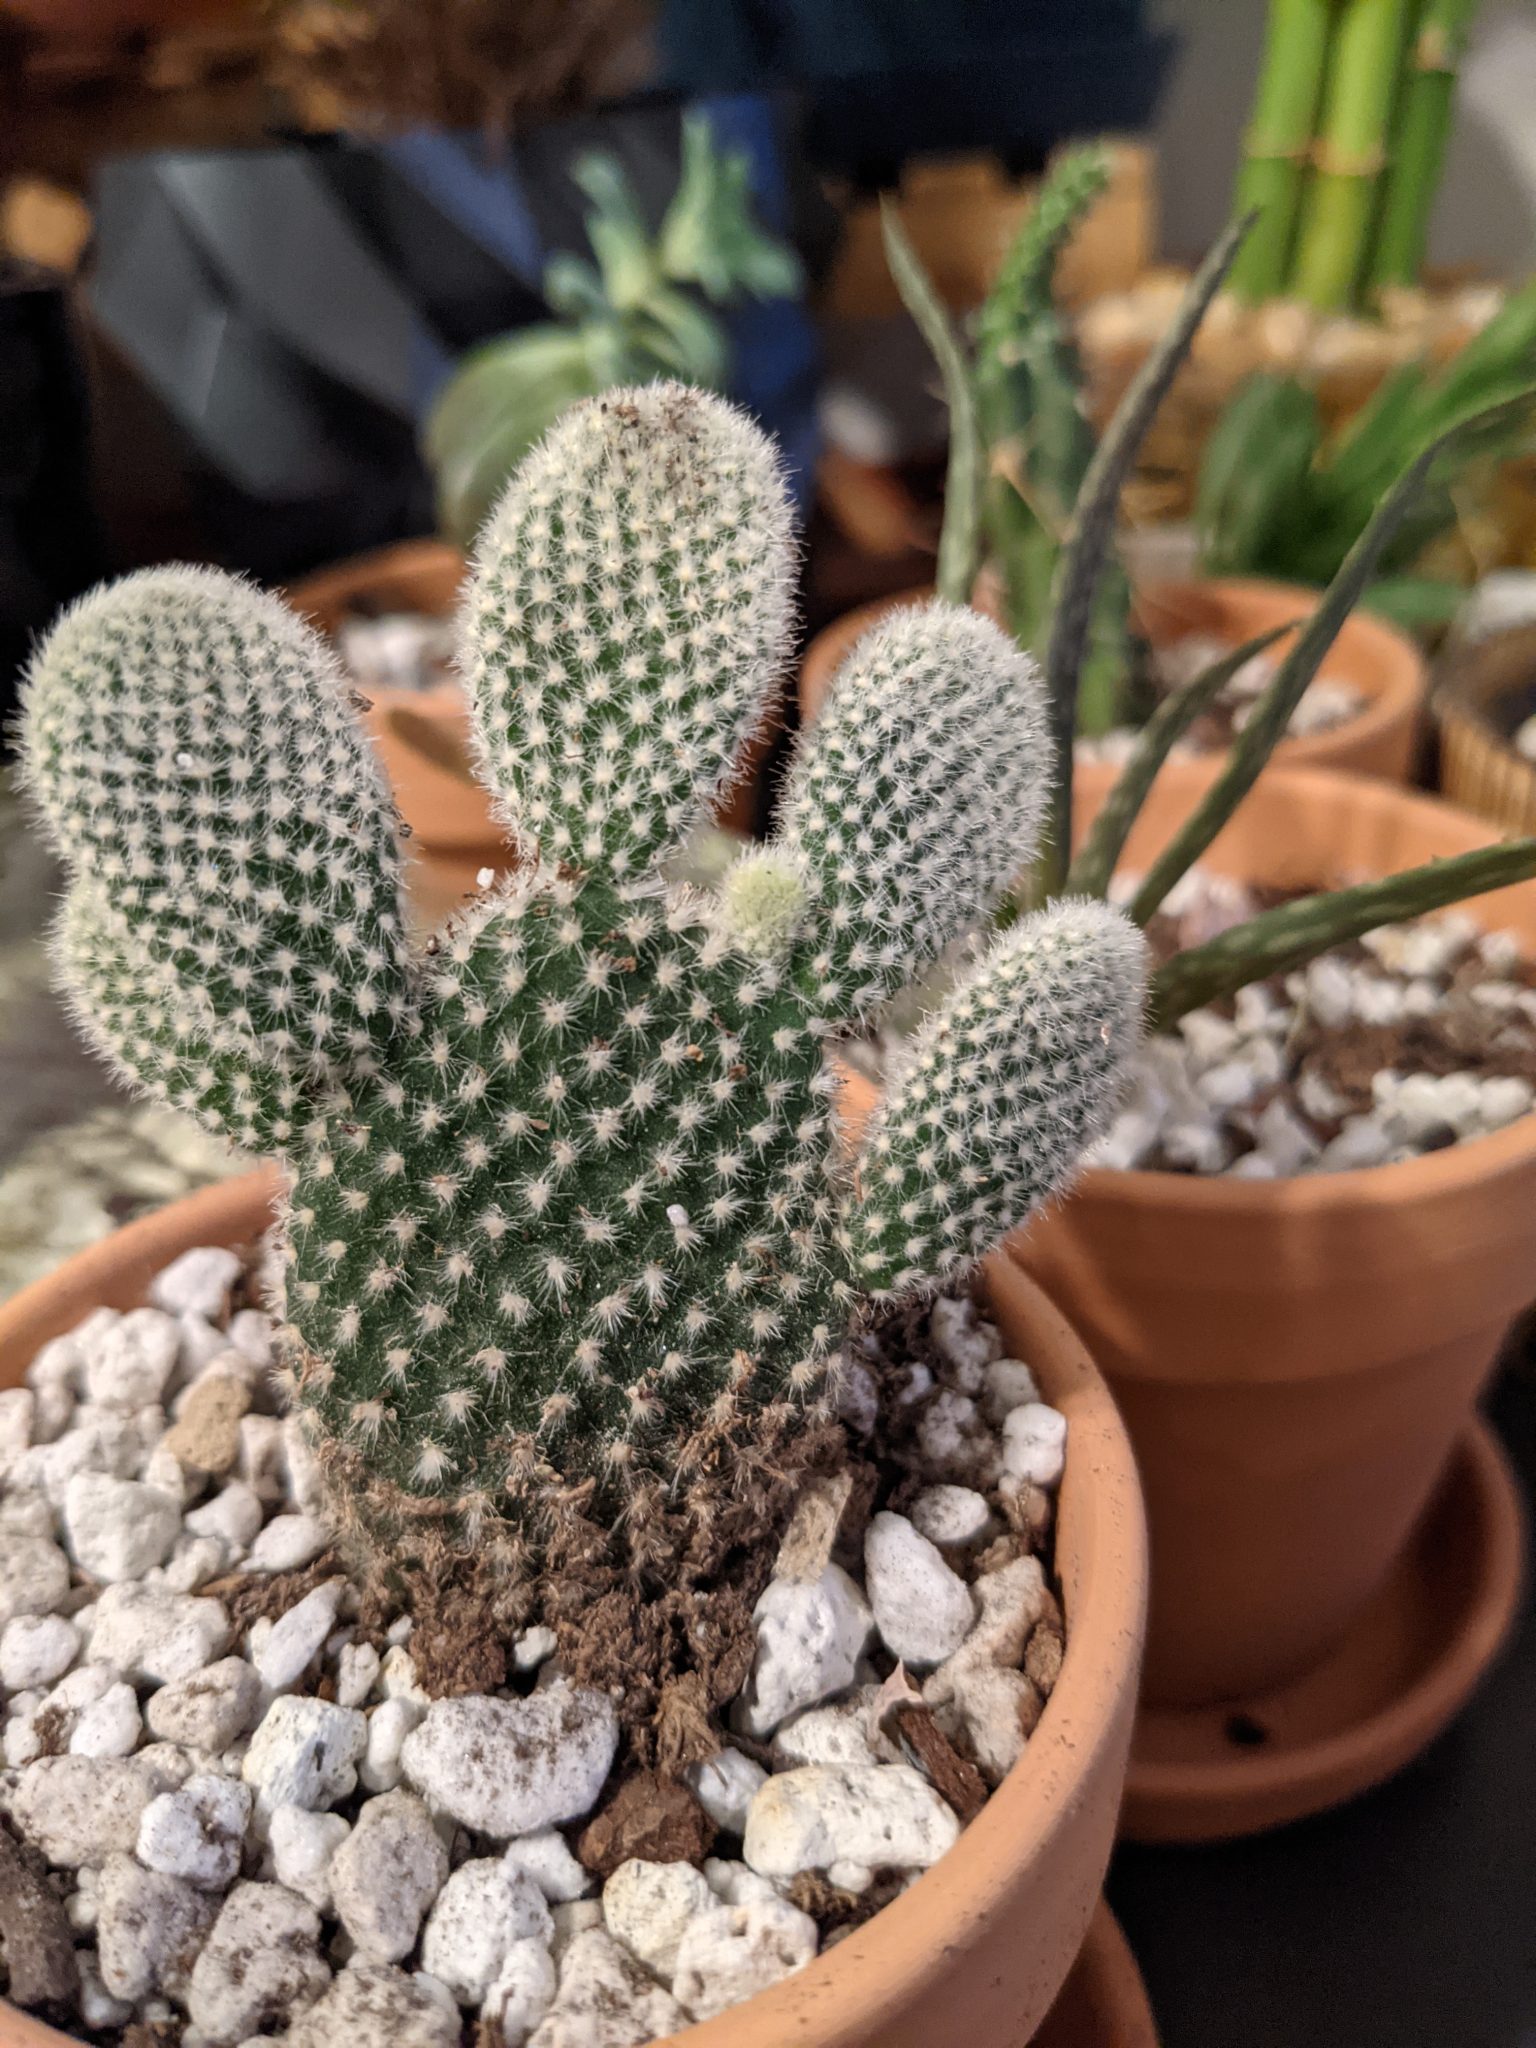 A small, very round cactus with some small round parts growing out of it.